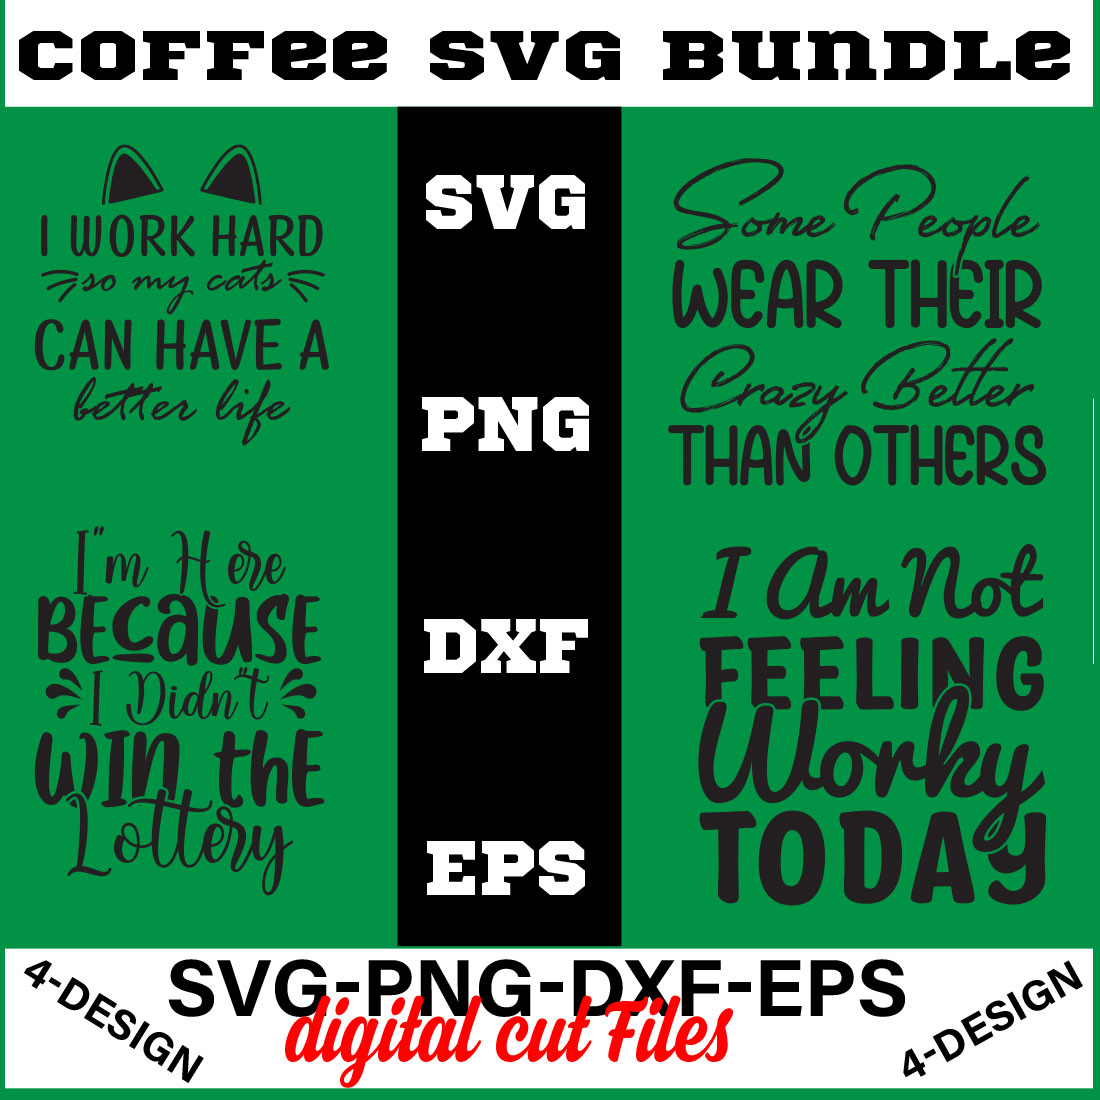 Coffee SVG Bundle, Funny Coffee SVG, Coffee Quote Svg, Caffeine Queen, Coffee Lovers, Coffee Obsessed Volume-9 cover image.